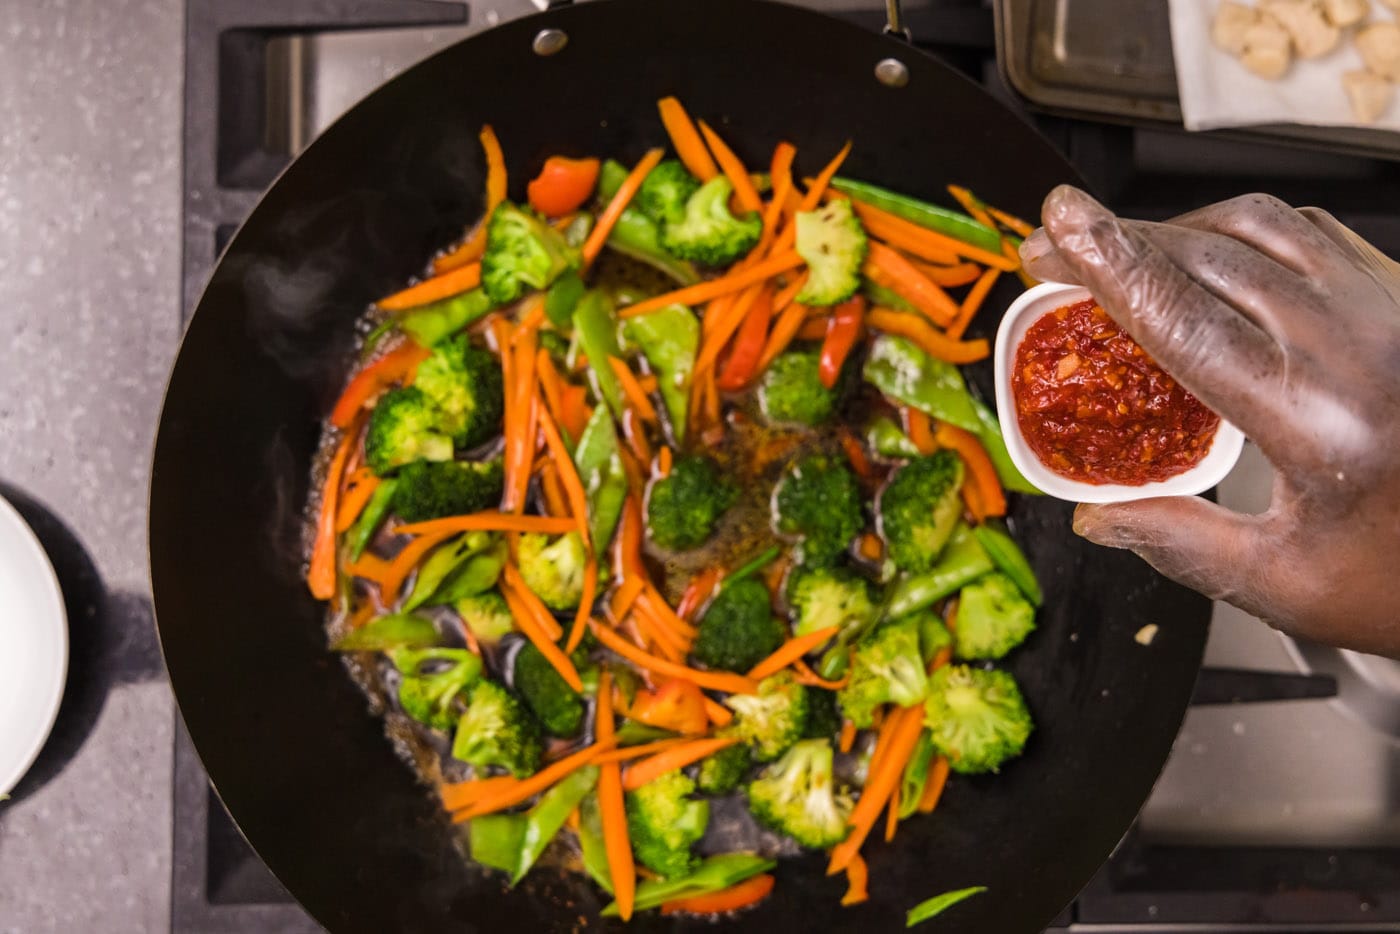 Asian chili garlic sauce over wok with vegetables